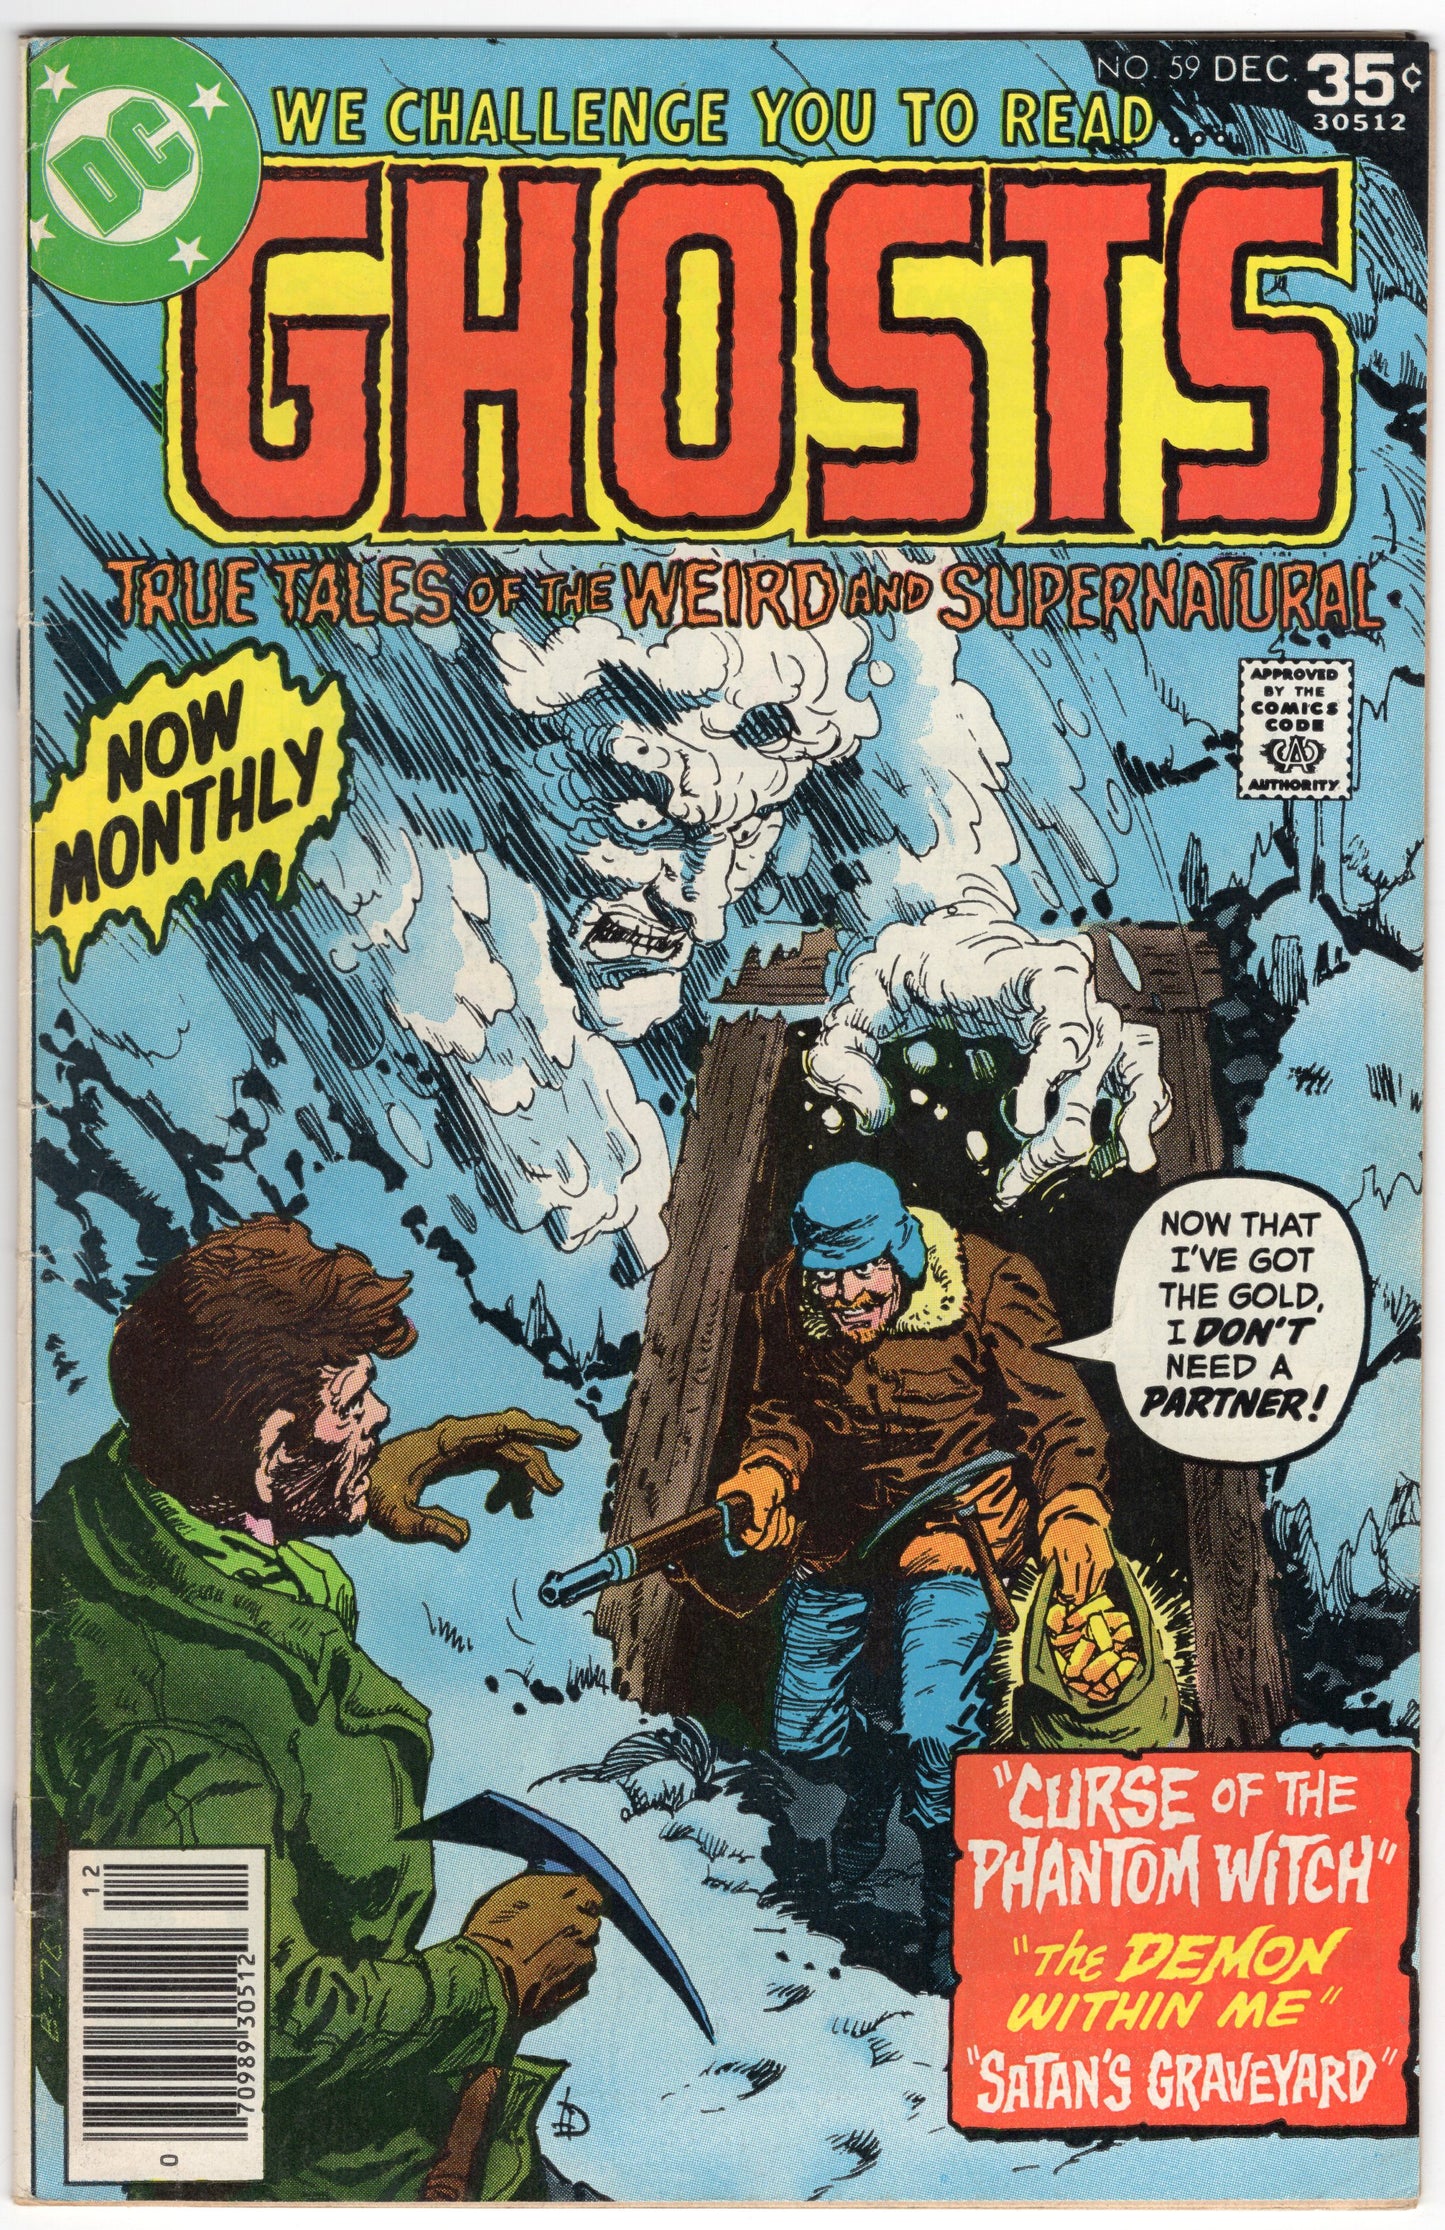 Ghost "True Tales of the Weird and Supernatural" #59 (Dec. 1977 - DC Comics) FN-